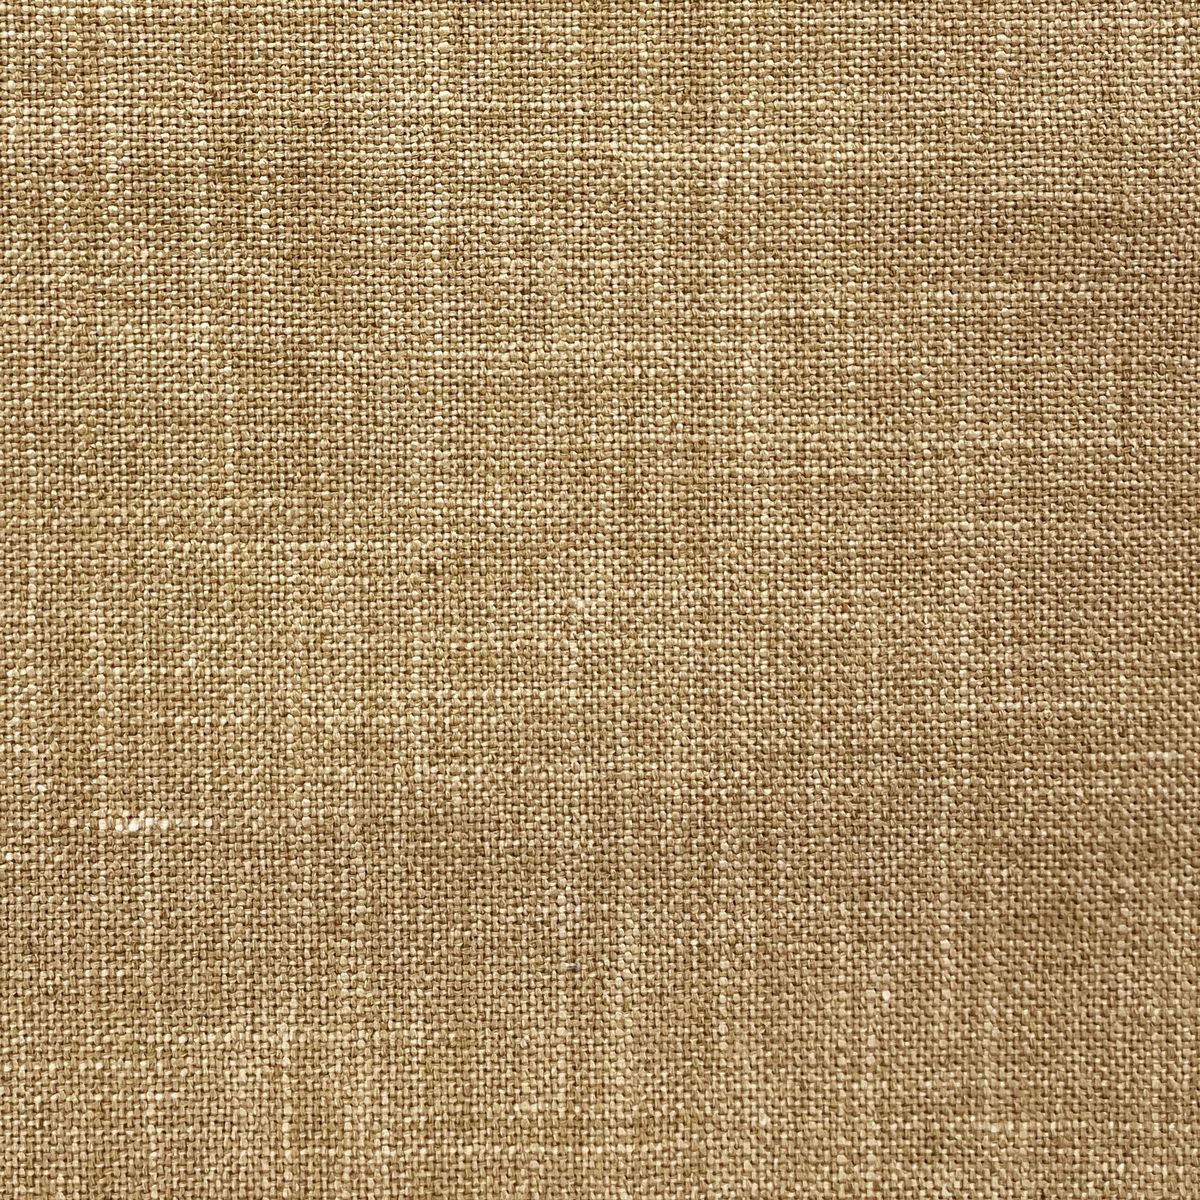 Cotswold Jute Fabric by Chatham Glyn